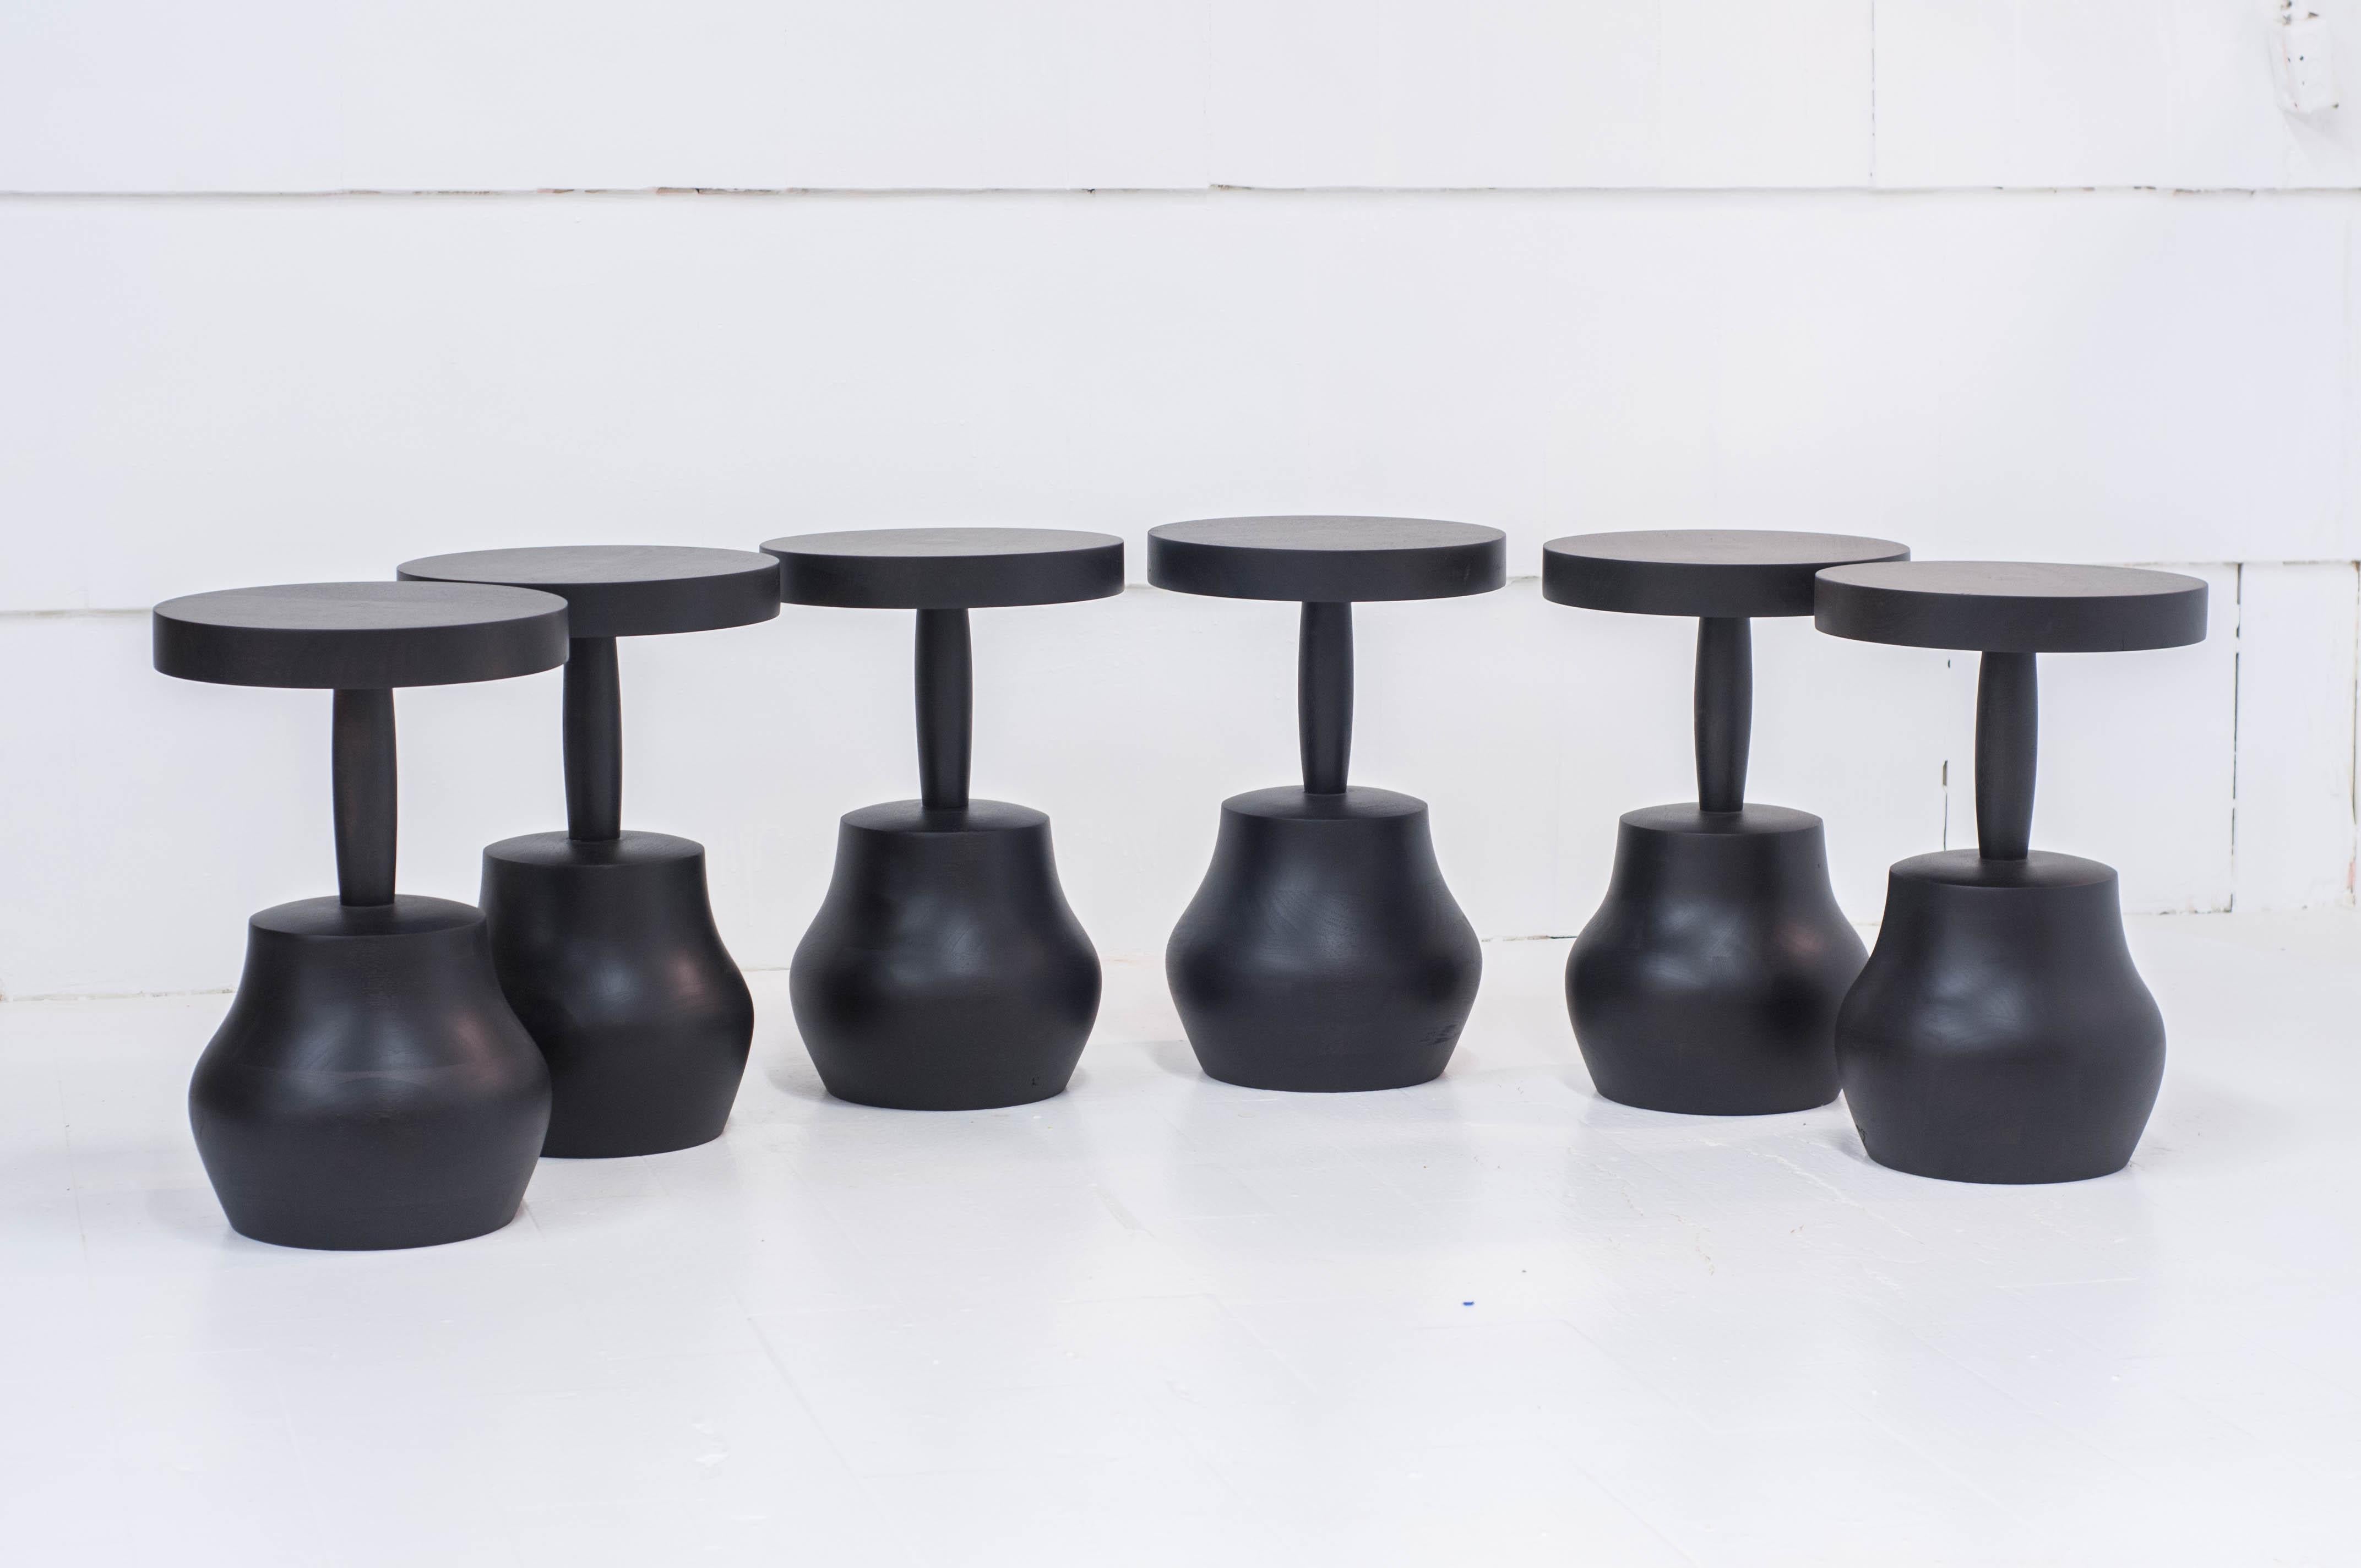 Curvaceous bell shaped side tables in hand carved solid wood.